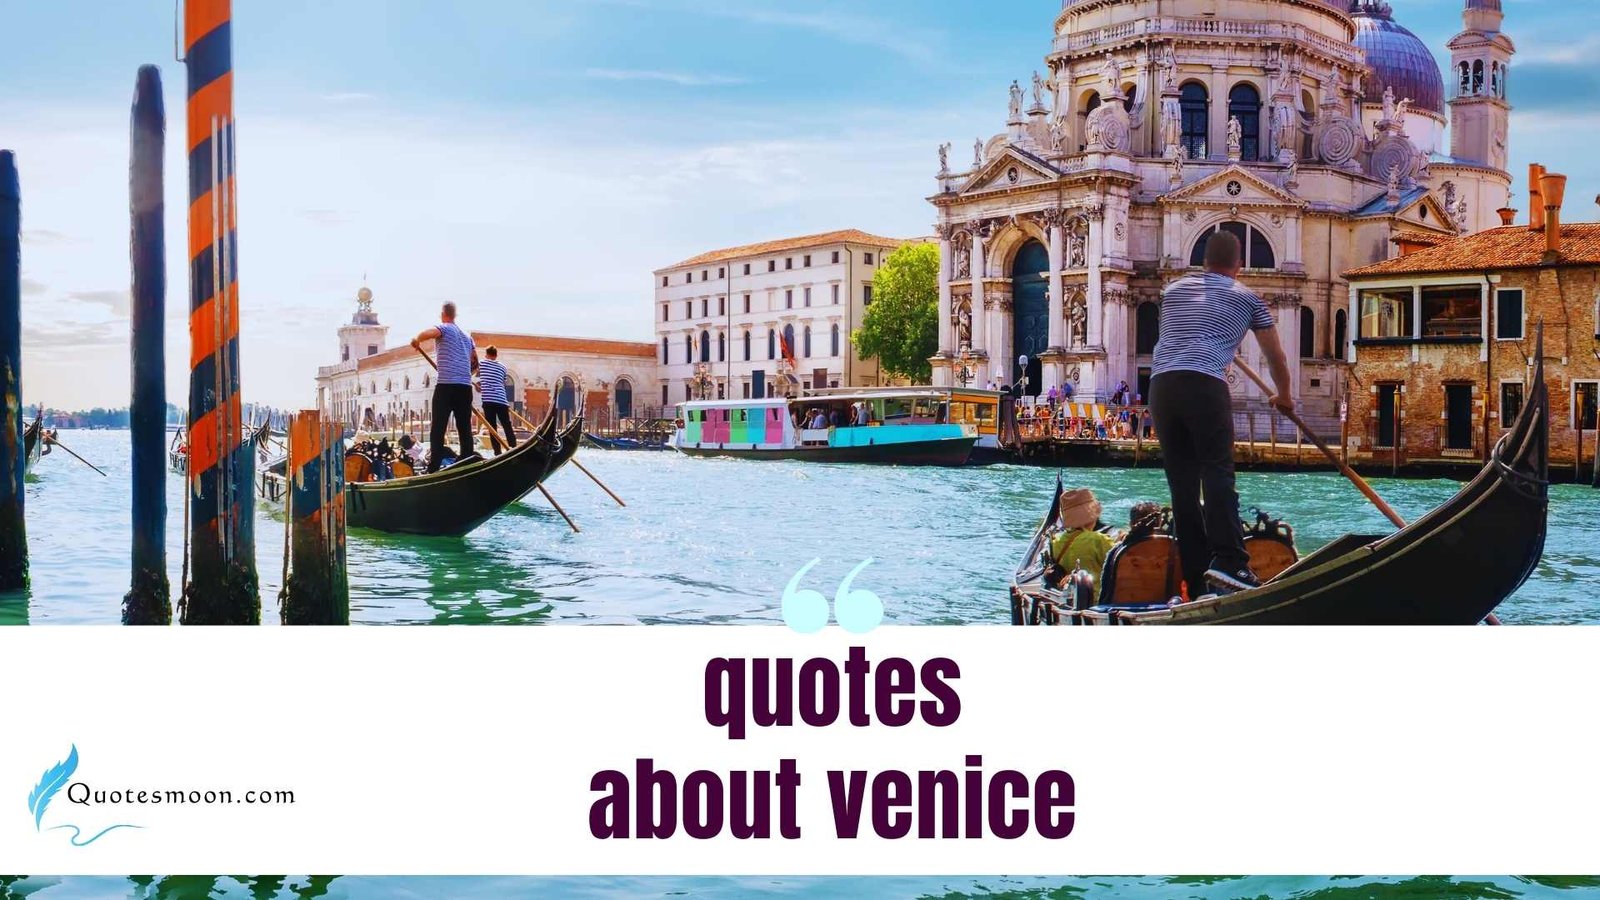 quotes about venice images